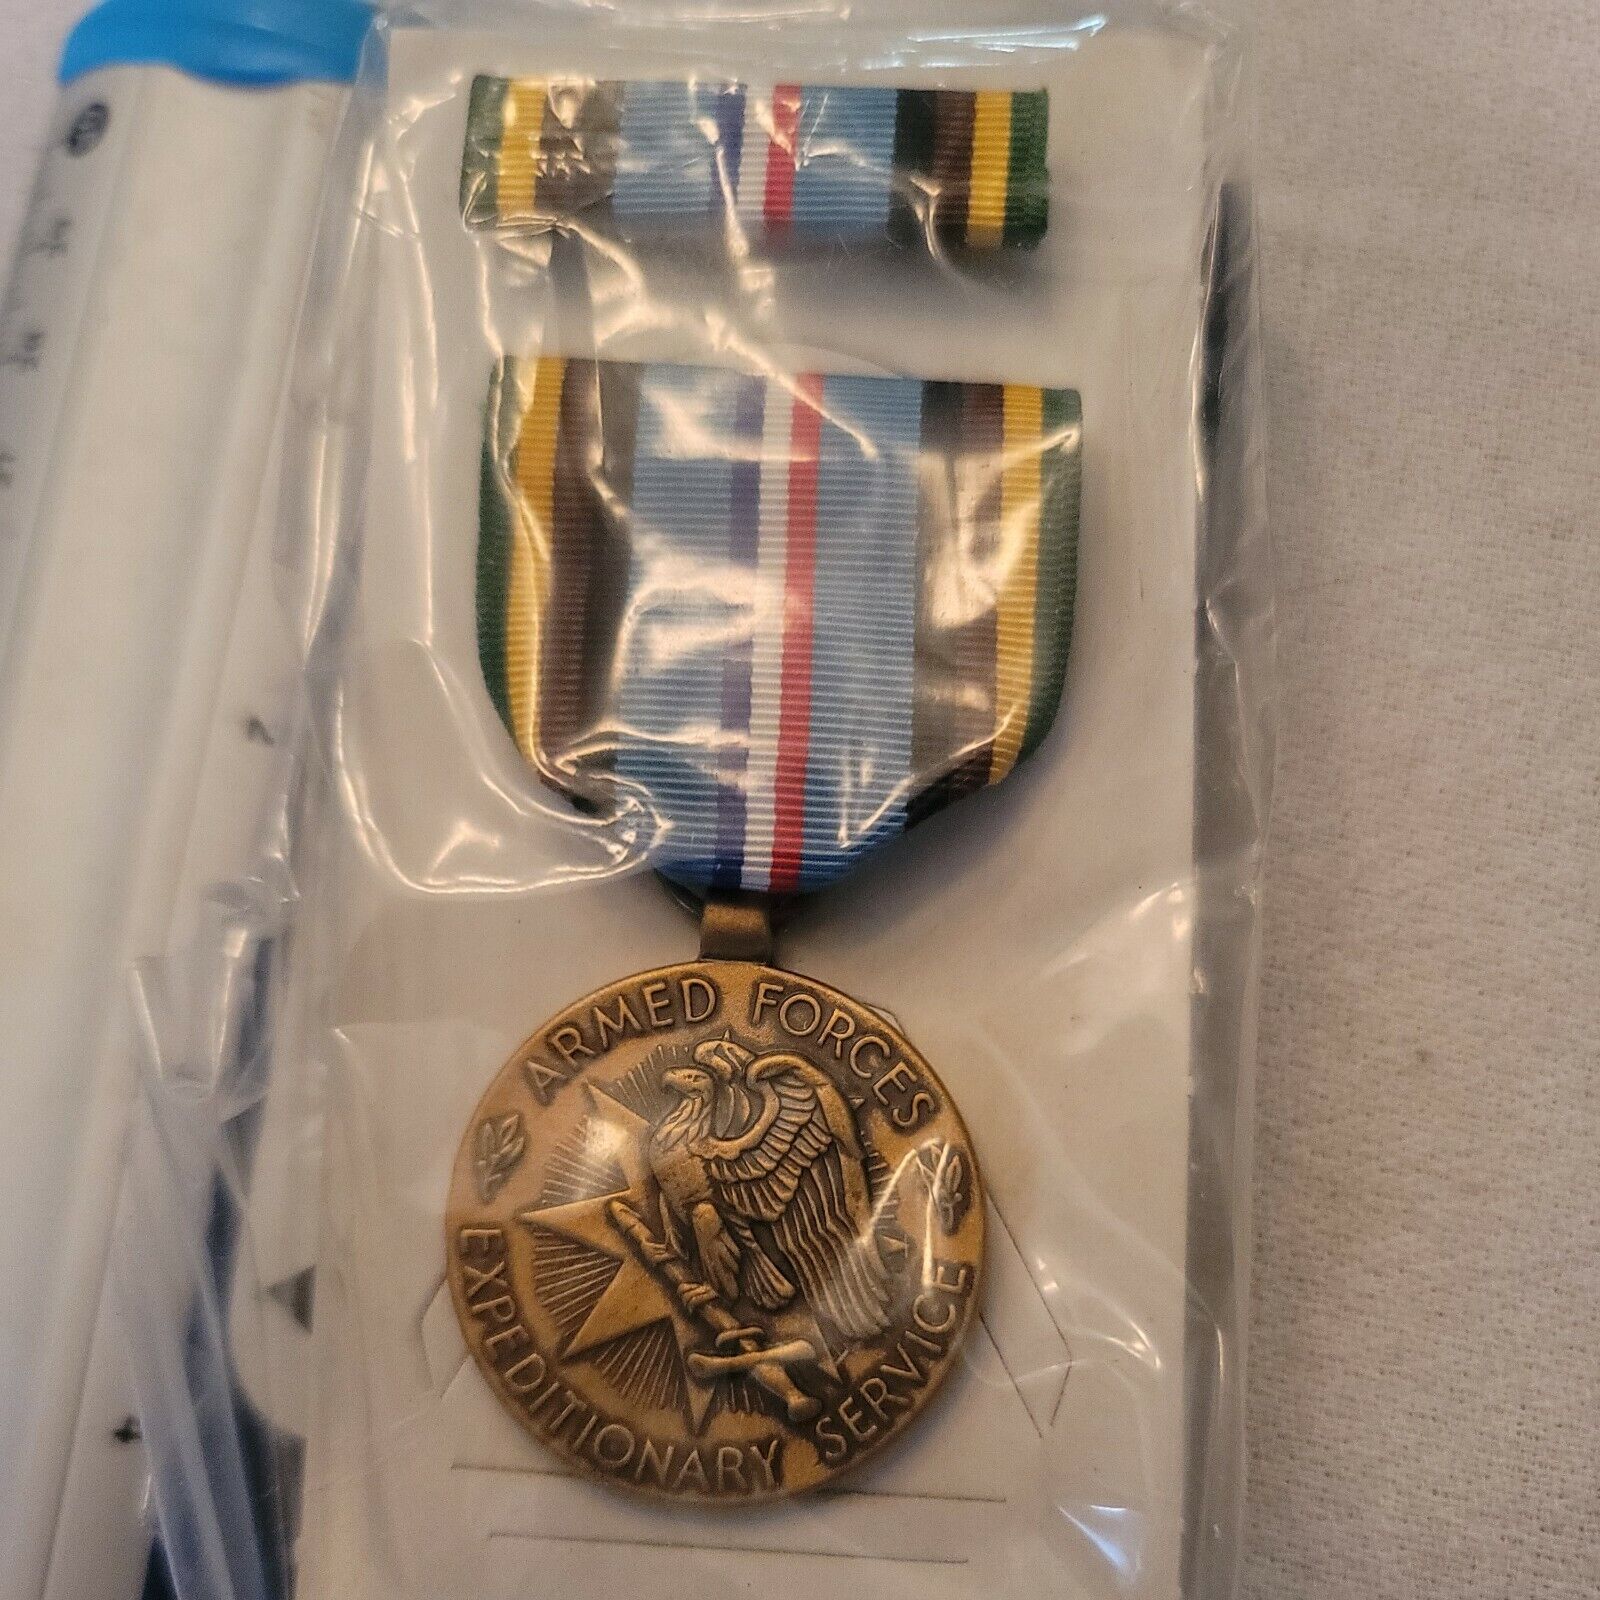 Armed Forces Expeditionary Medal + Ribbon in--- Box DEALER BLOW OUT SALE $5.00